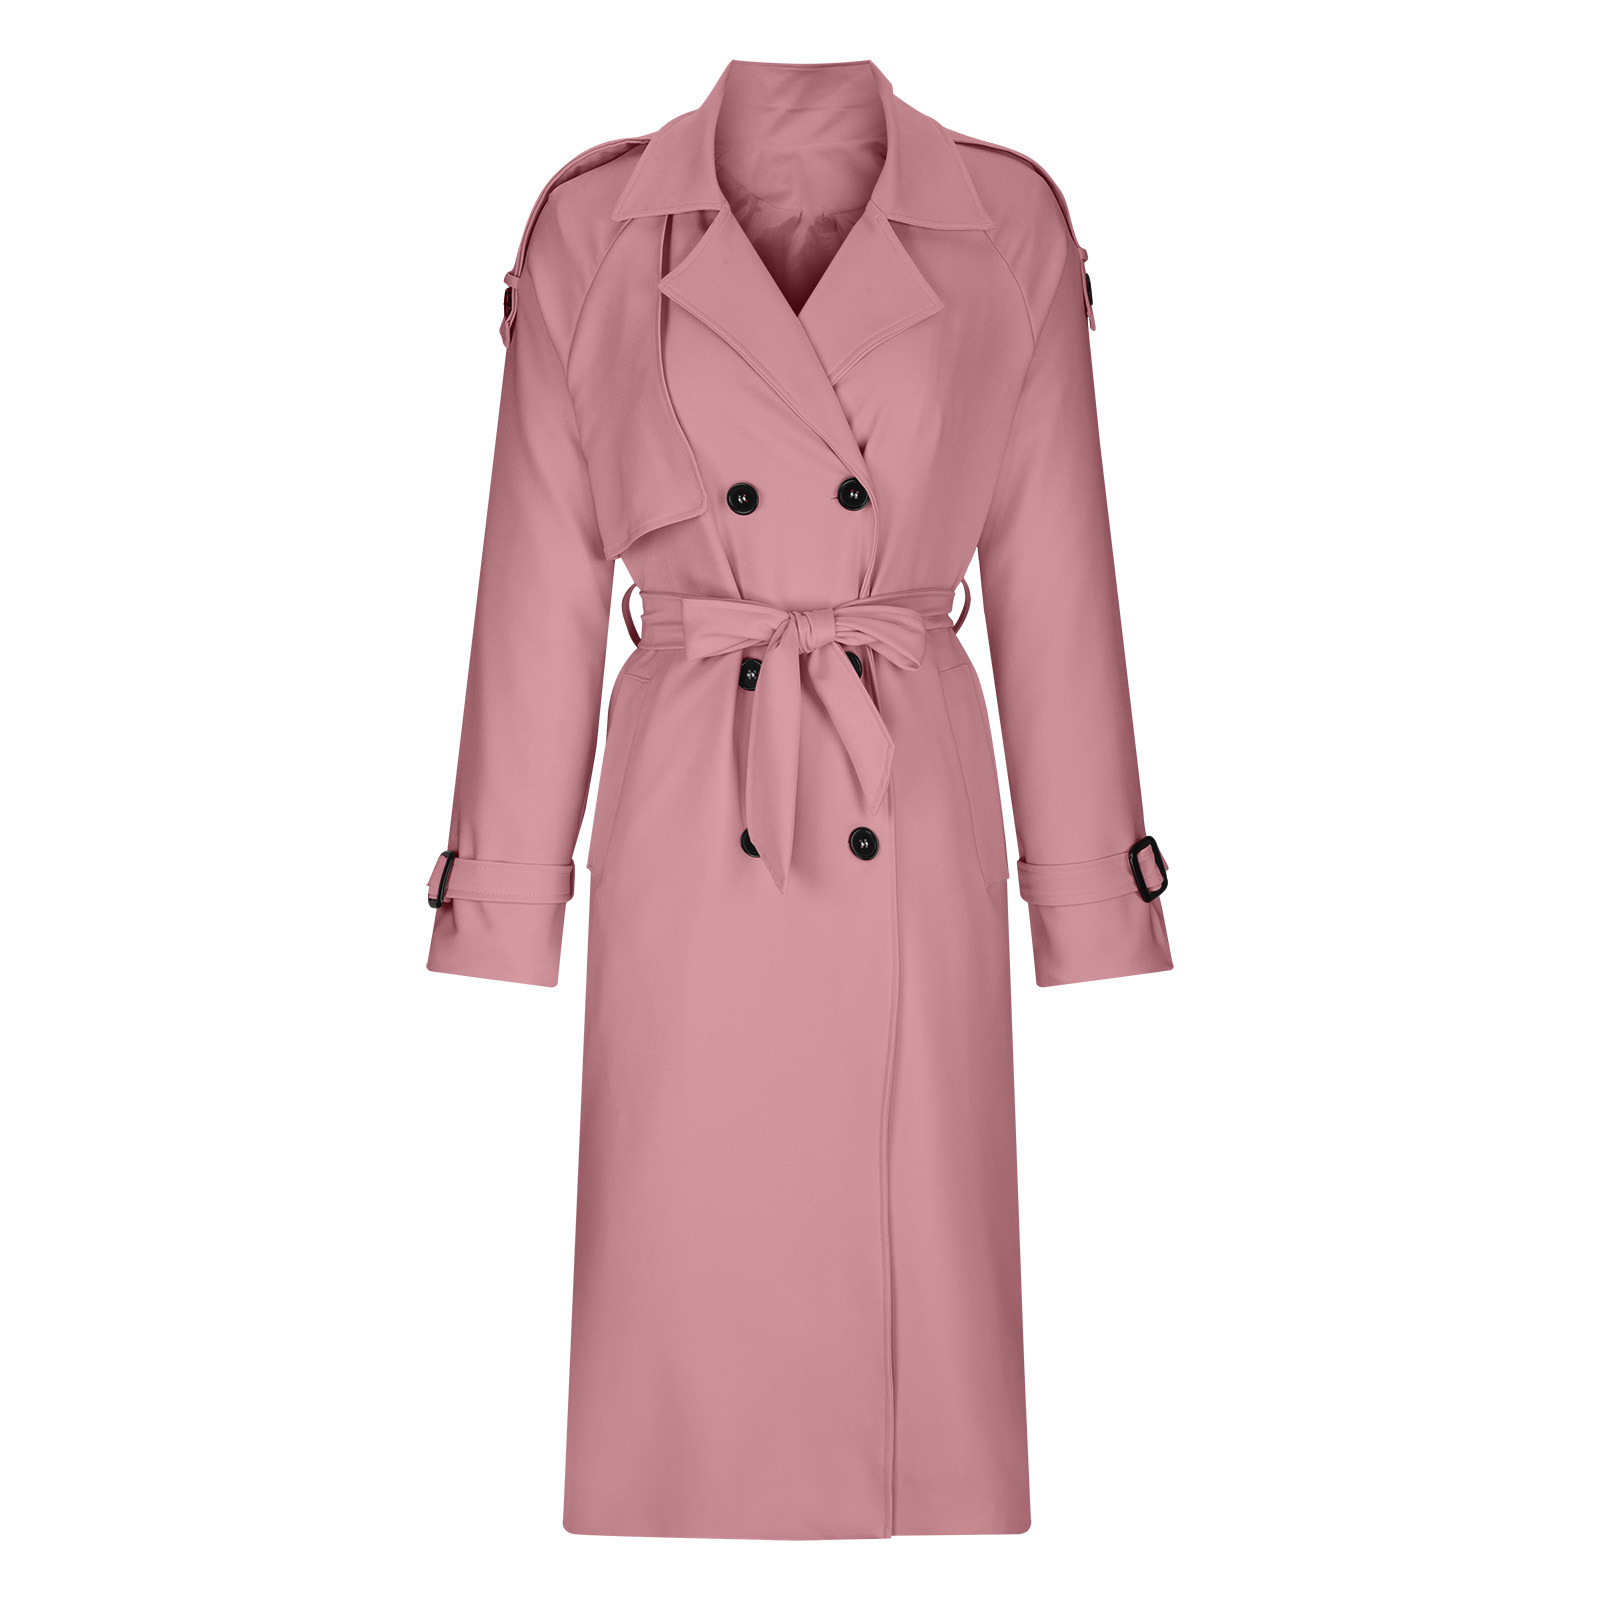 YFPWM Women Classic Double Breasted Coats Slim Long Jacket Winter Long Trench Coat Long Sleeve Double Breasted Coat Trench Coat Long Sleeve Coat Jacket Pink XL - image 4 of 7